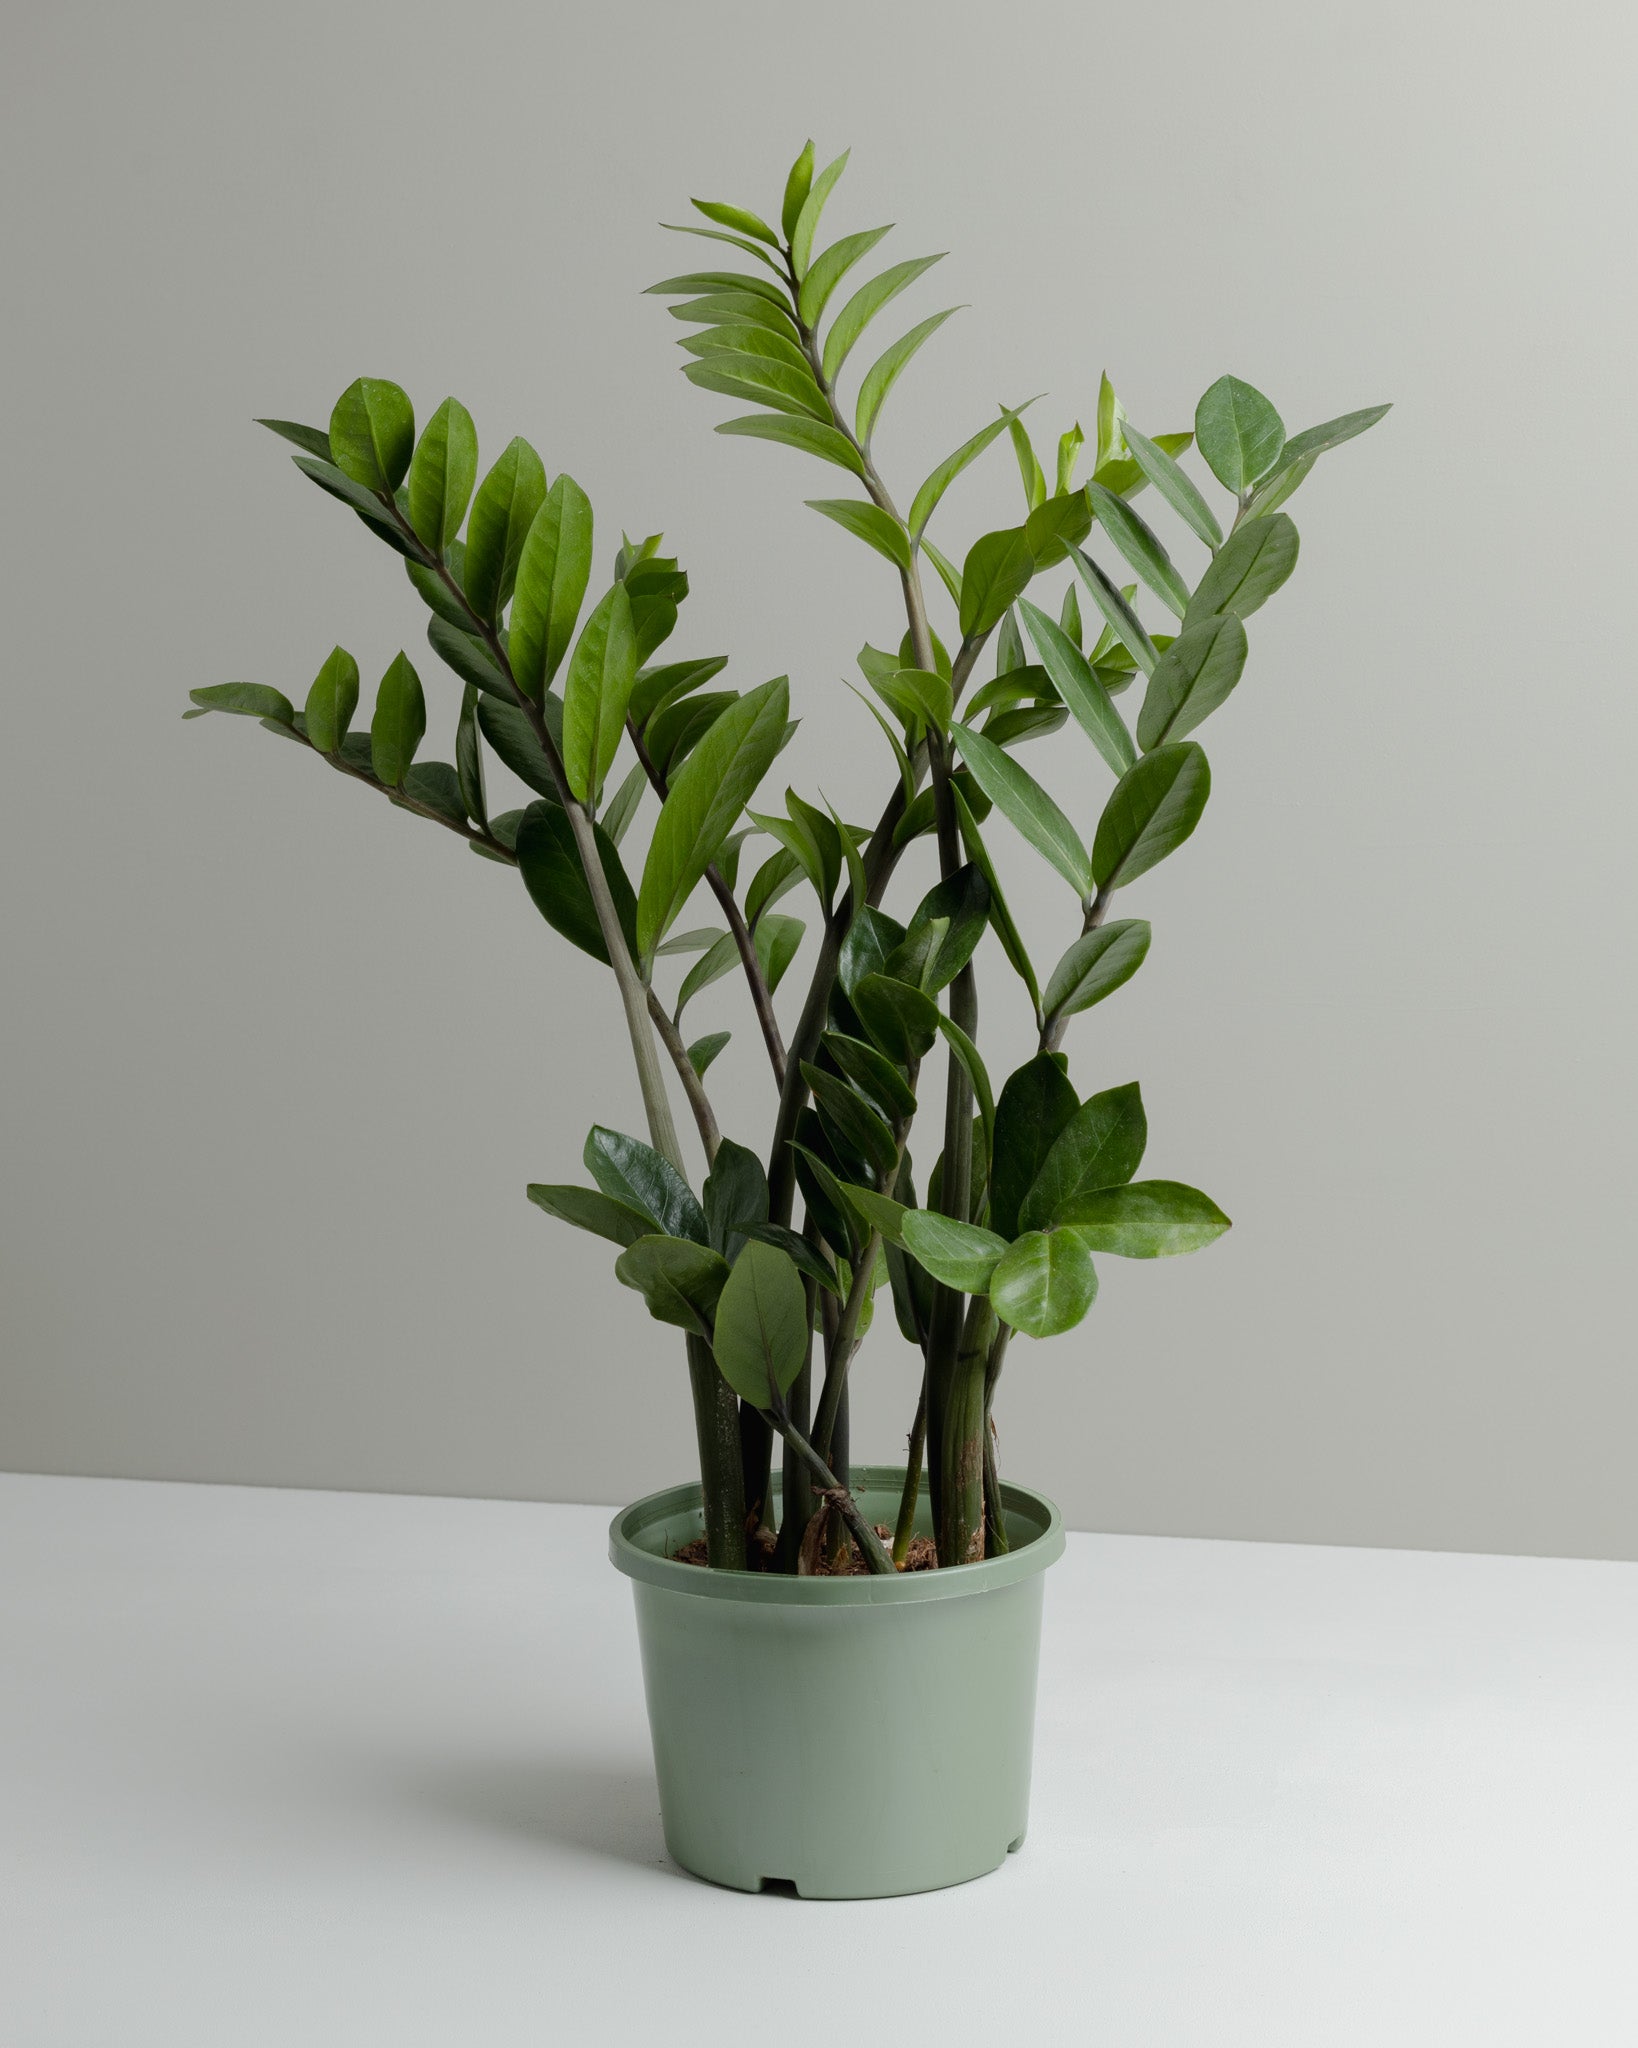 Zanzibar Gem. Buy Plants and have it delivered or Click and collect from our Brisbane based store.